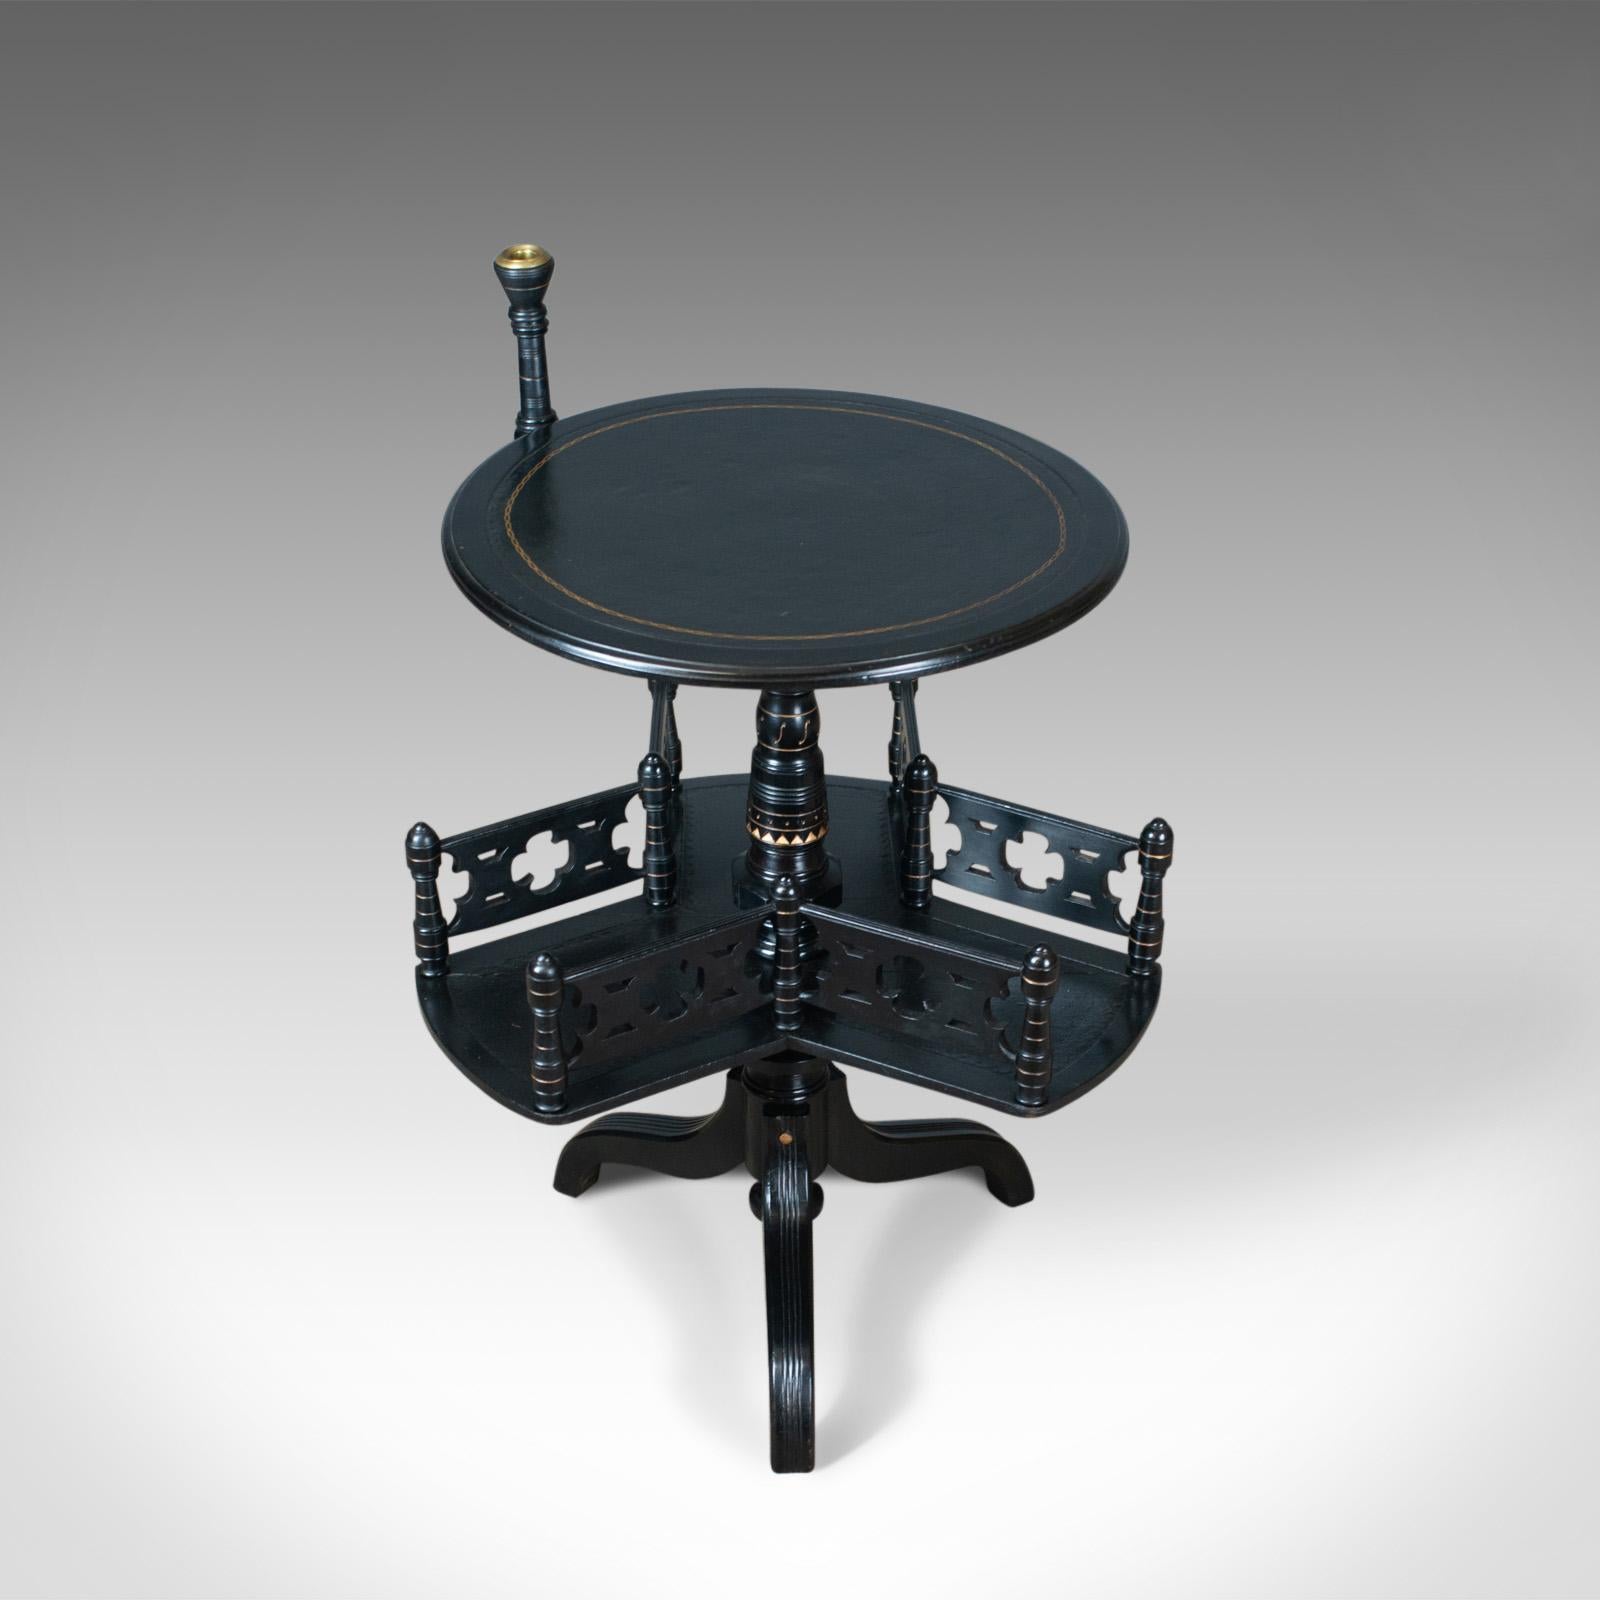 This is an aesthetic period reading table, an English, Victorian ebonised side table with rotating bookshelf and candle stand dating to the late 19th century, circa 1880.

Presenting well and in superb condition
Polished, ebonised finish